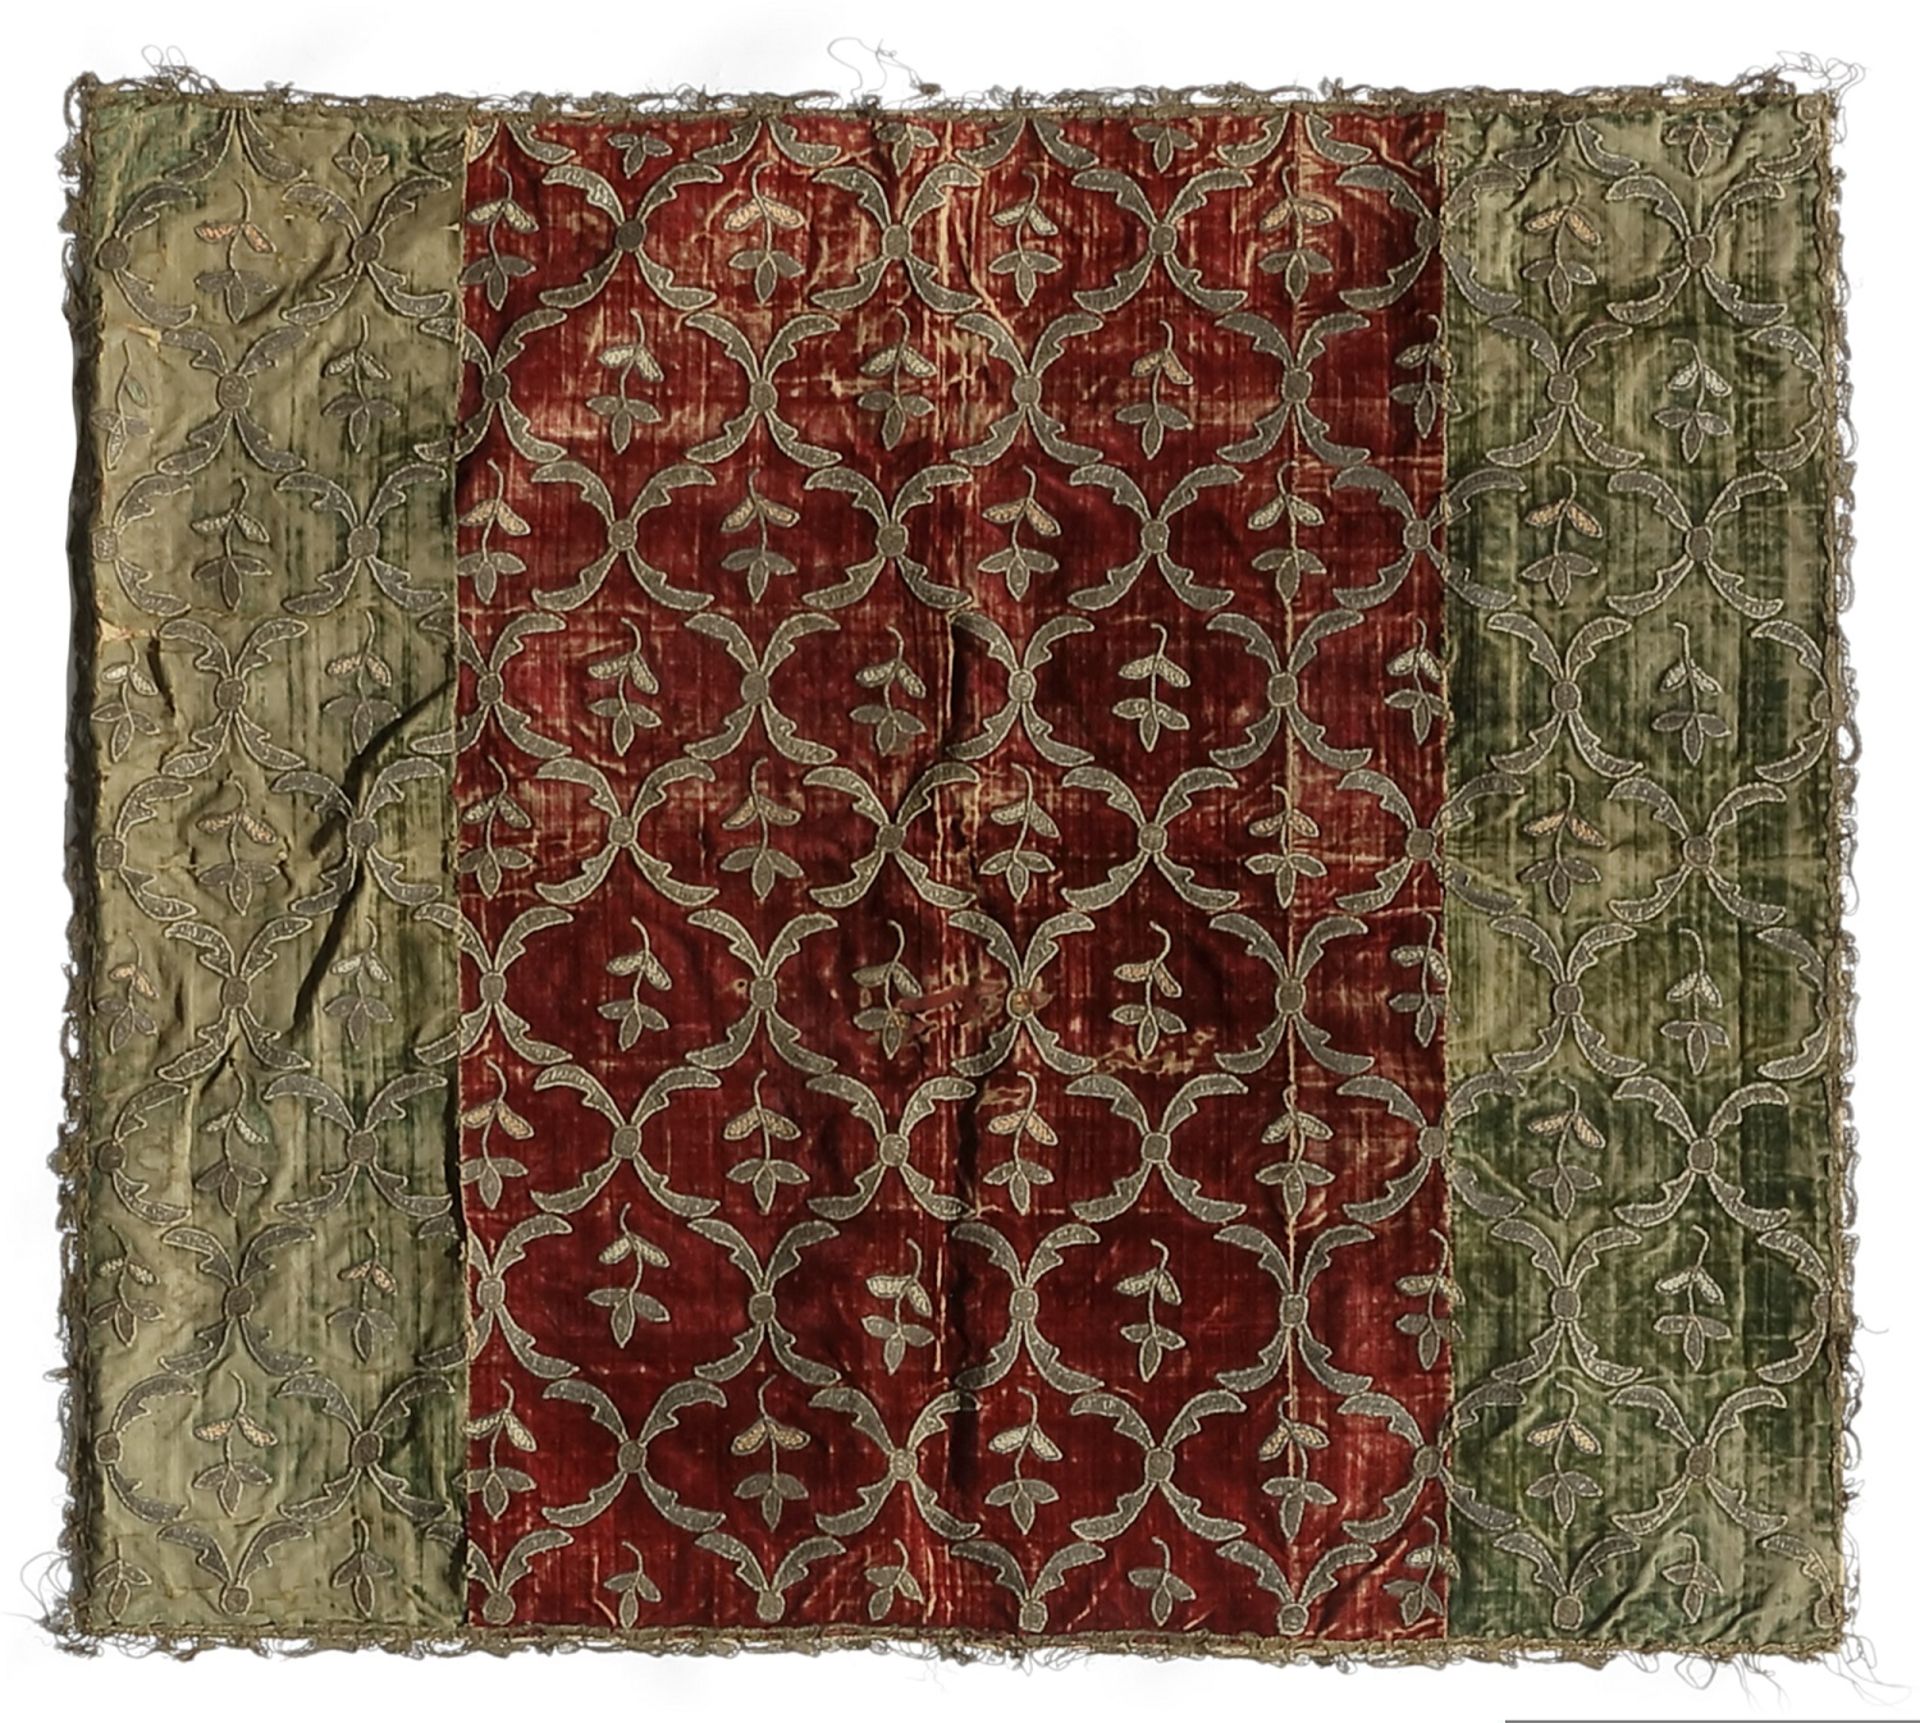 AN EUROPEAN SILK, VELVET AND METAL TEXTILE, PROBABLY ITALY, EARLY 18TH CENTURY